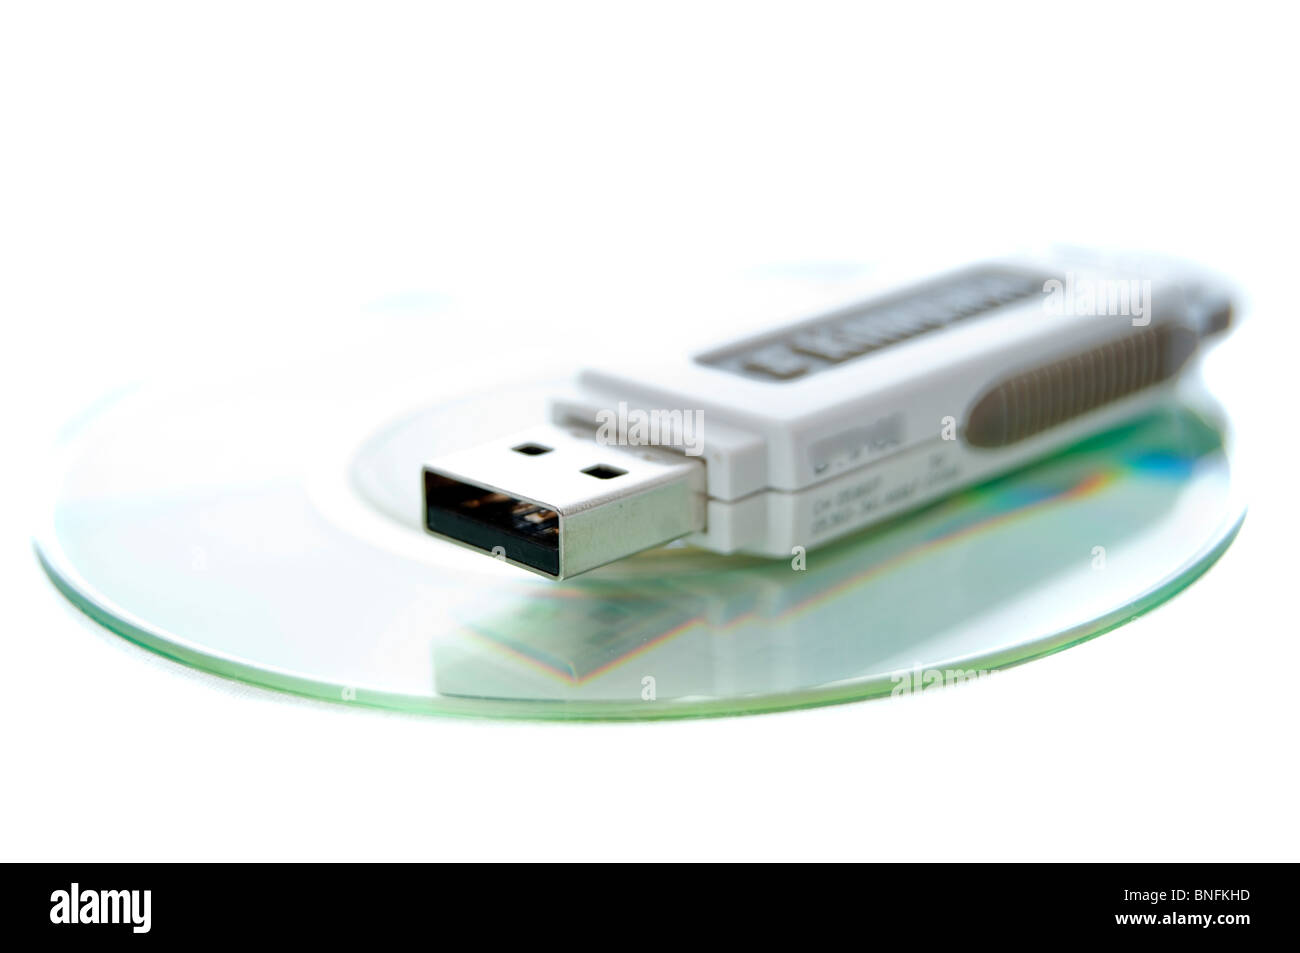 Miniature 3 inch CDR and thumbdrive. Small technology. Stock Photo